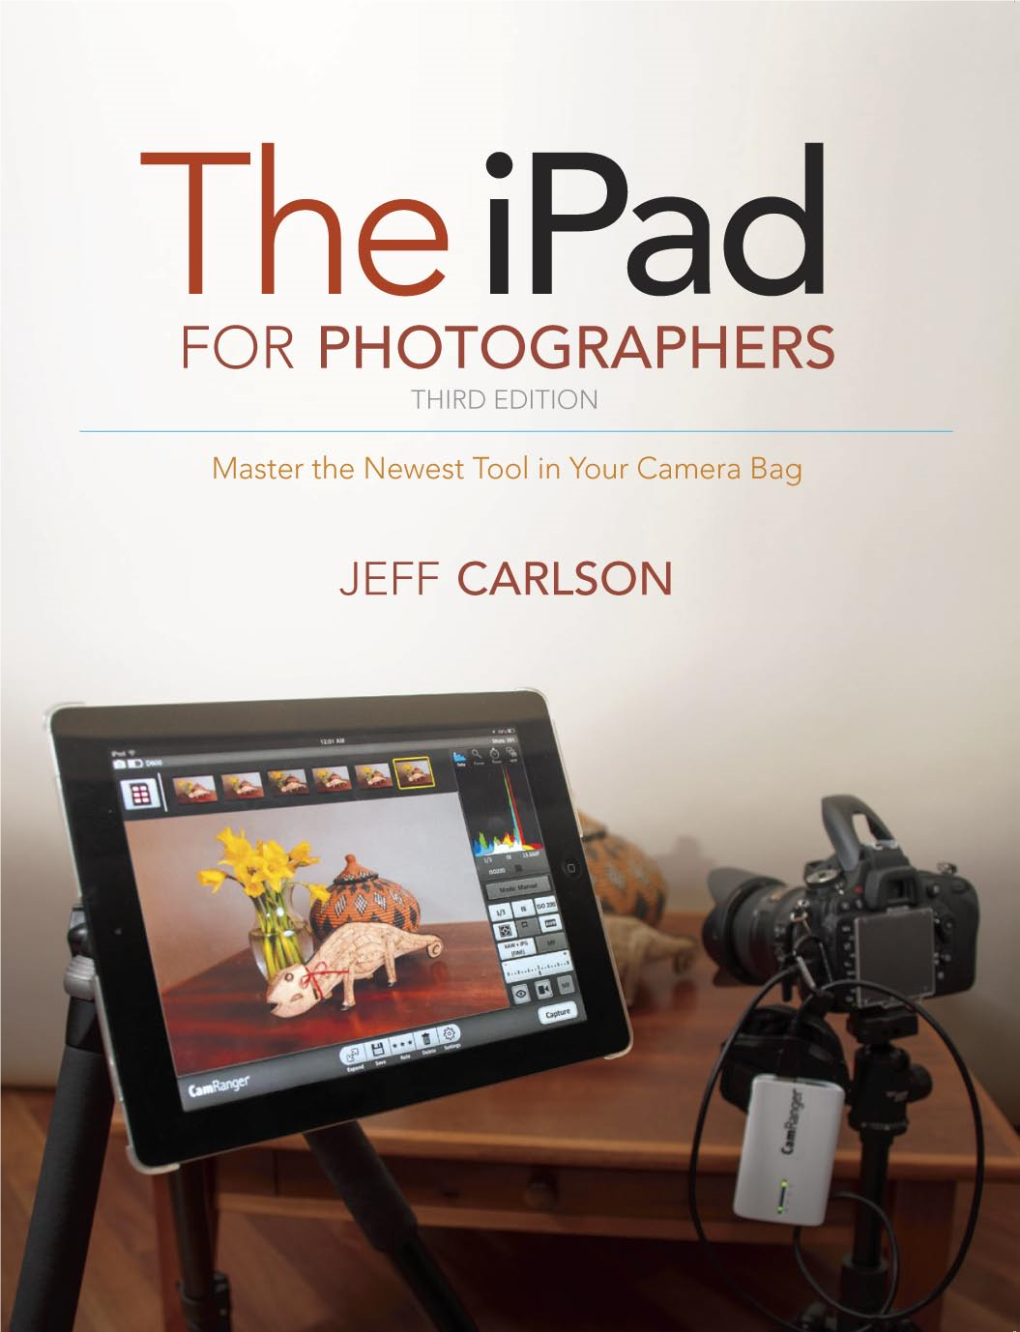 The Ipad for Photographers Third Edition